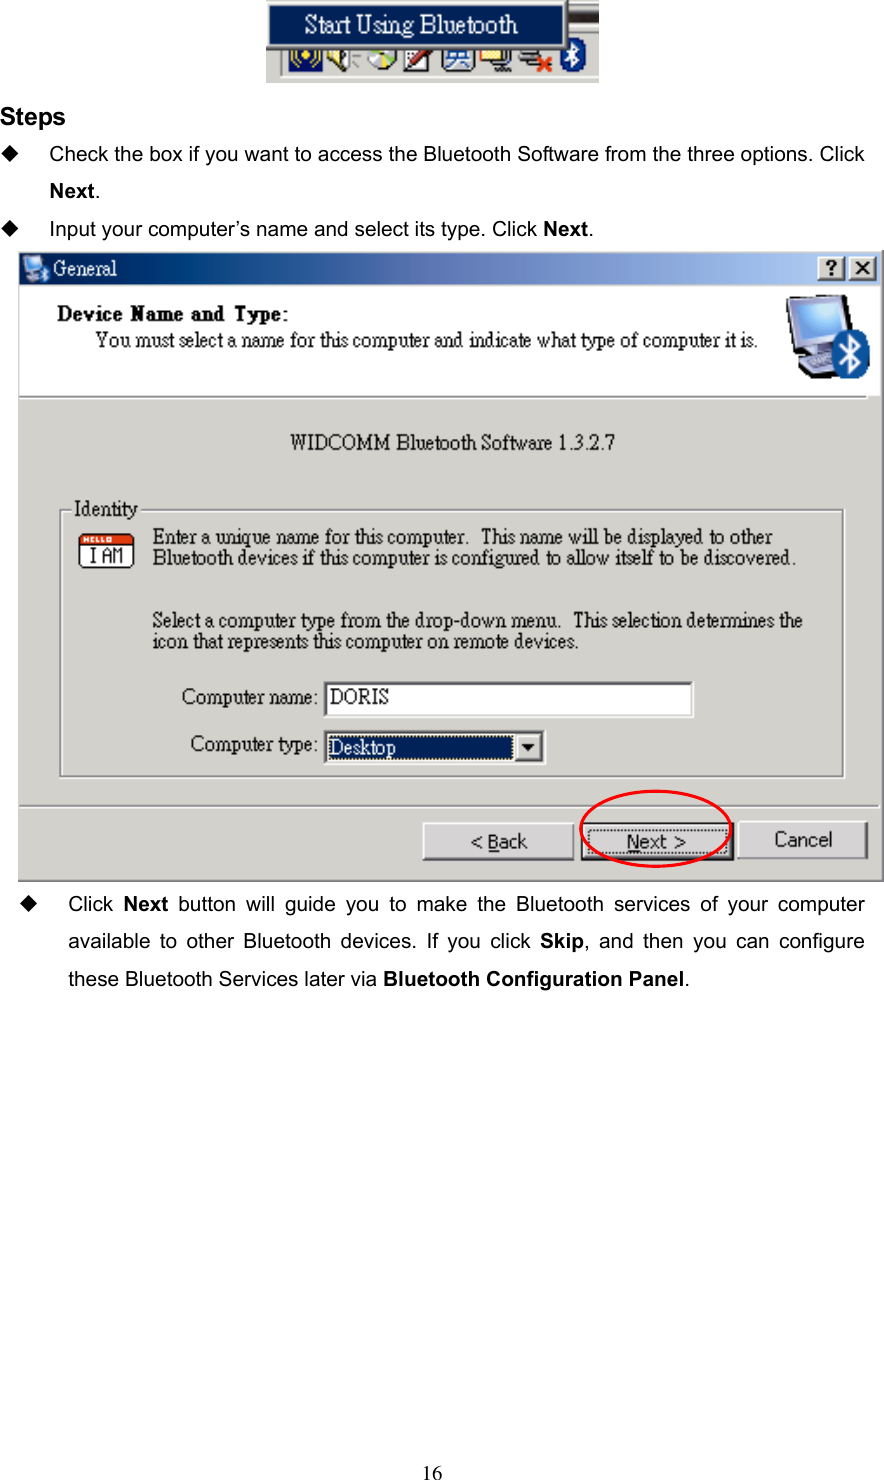  Steps   Check the box if you want to access the Bluetooth Software from the three options. Click Next.   Input your computer’s name and select its type. Click Next.    Click Next button will guide you to make the Bluetooth services of your computer available to other Bluetooth devices. If you click Skip, and then you can configure these Bluetooth Services later via Bluetooth Configuration Panel.    16 